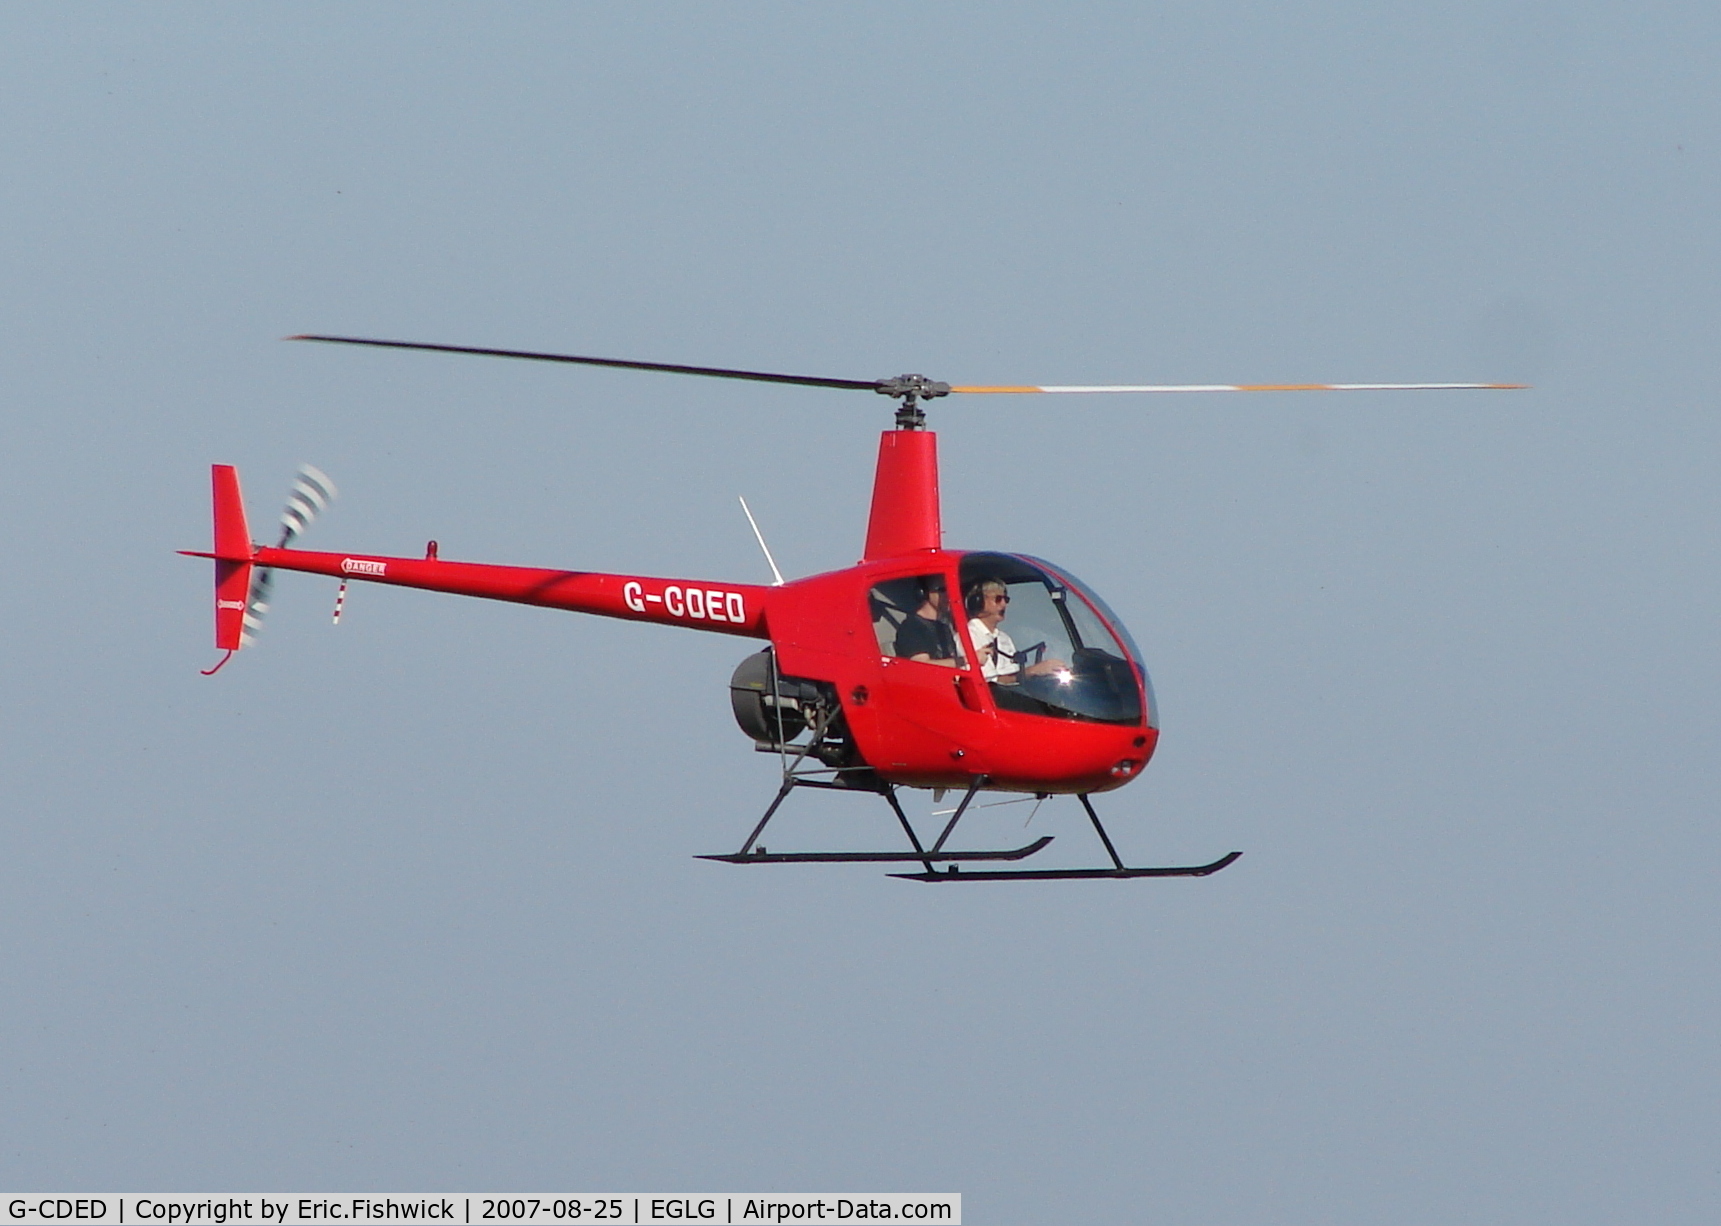 G-CDED, 2004 Robinson R22 Beta C/N 3747, 4. G-CDED at Panshanger Airfield.